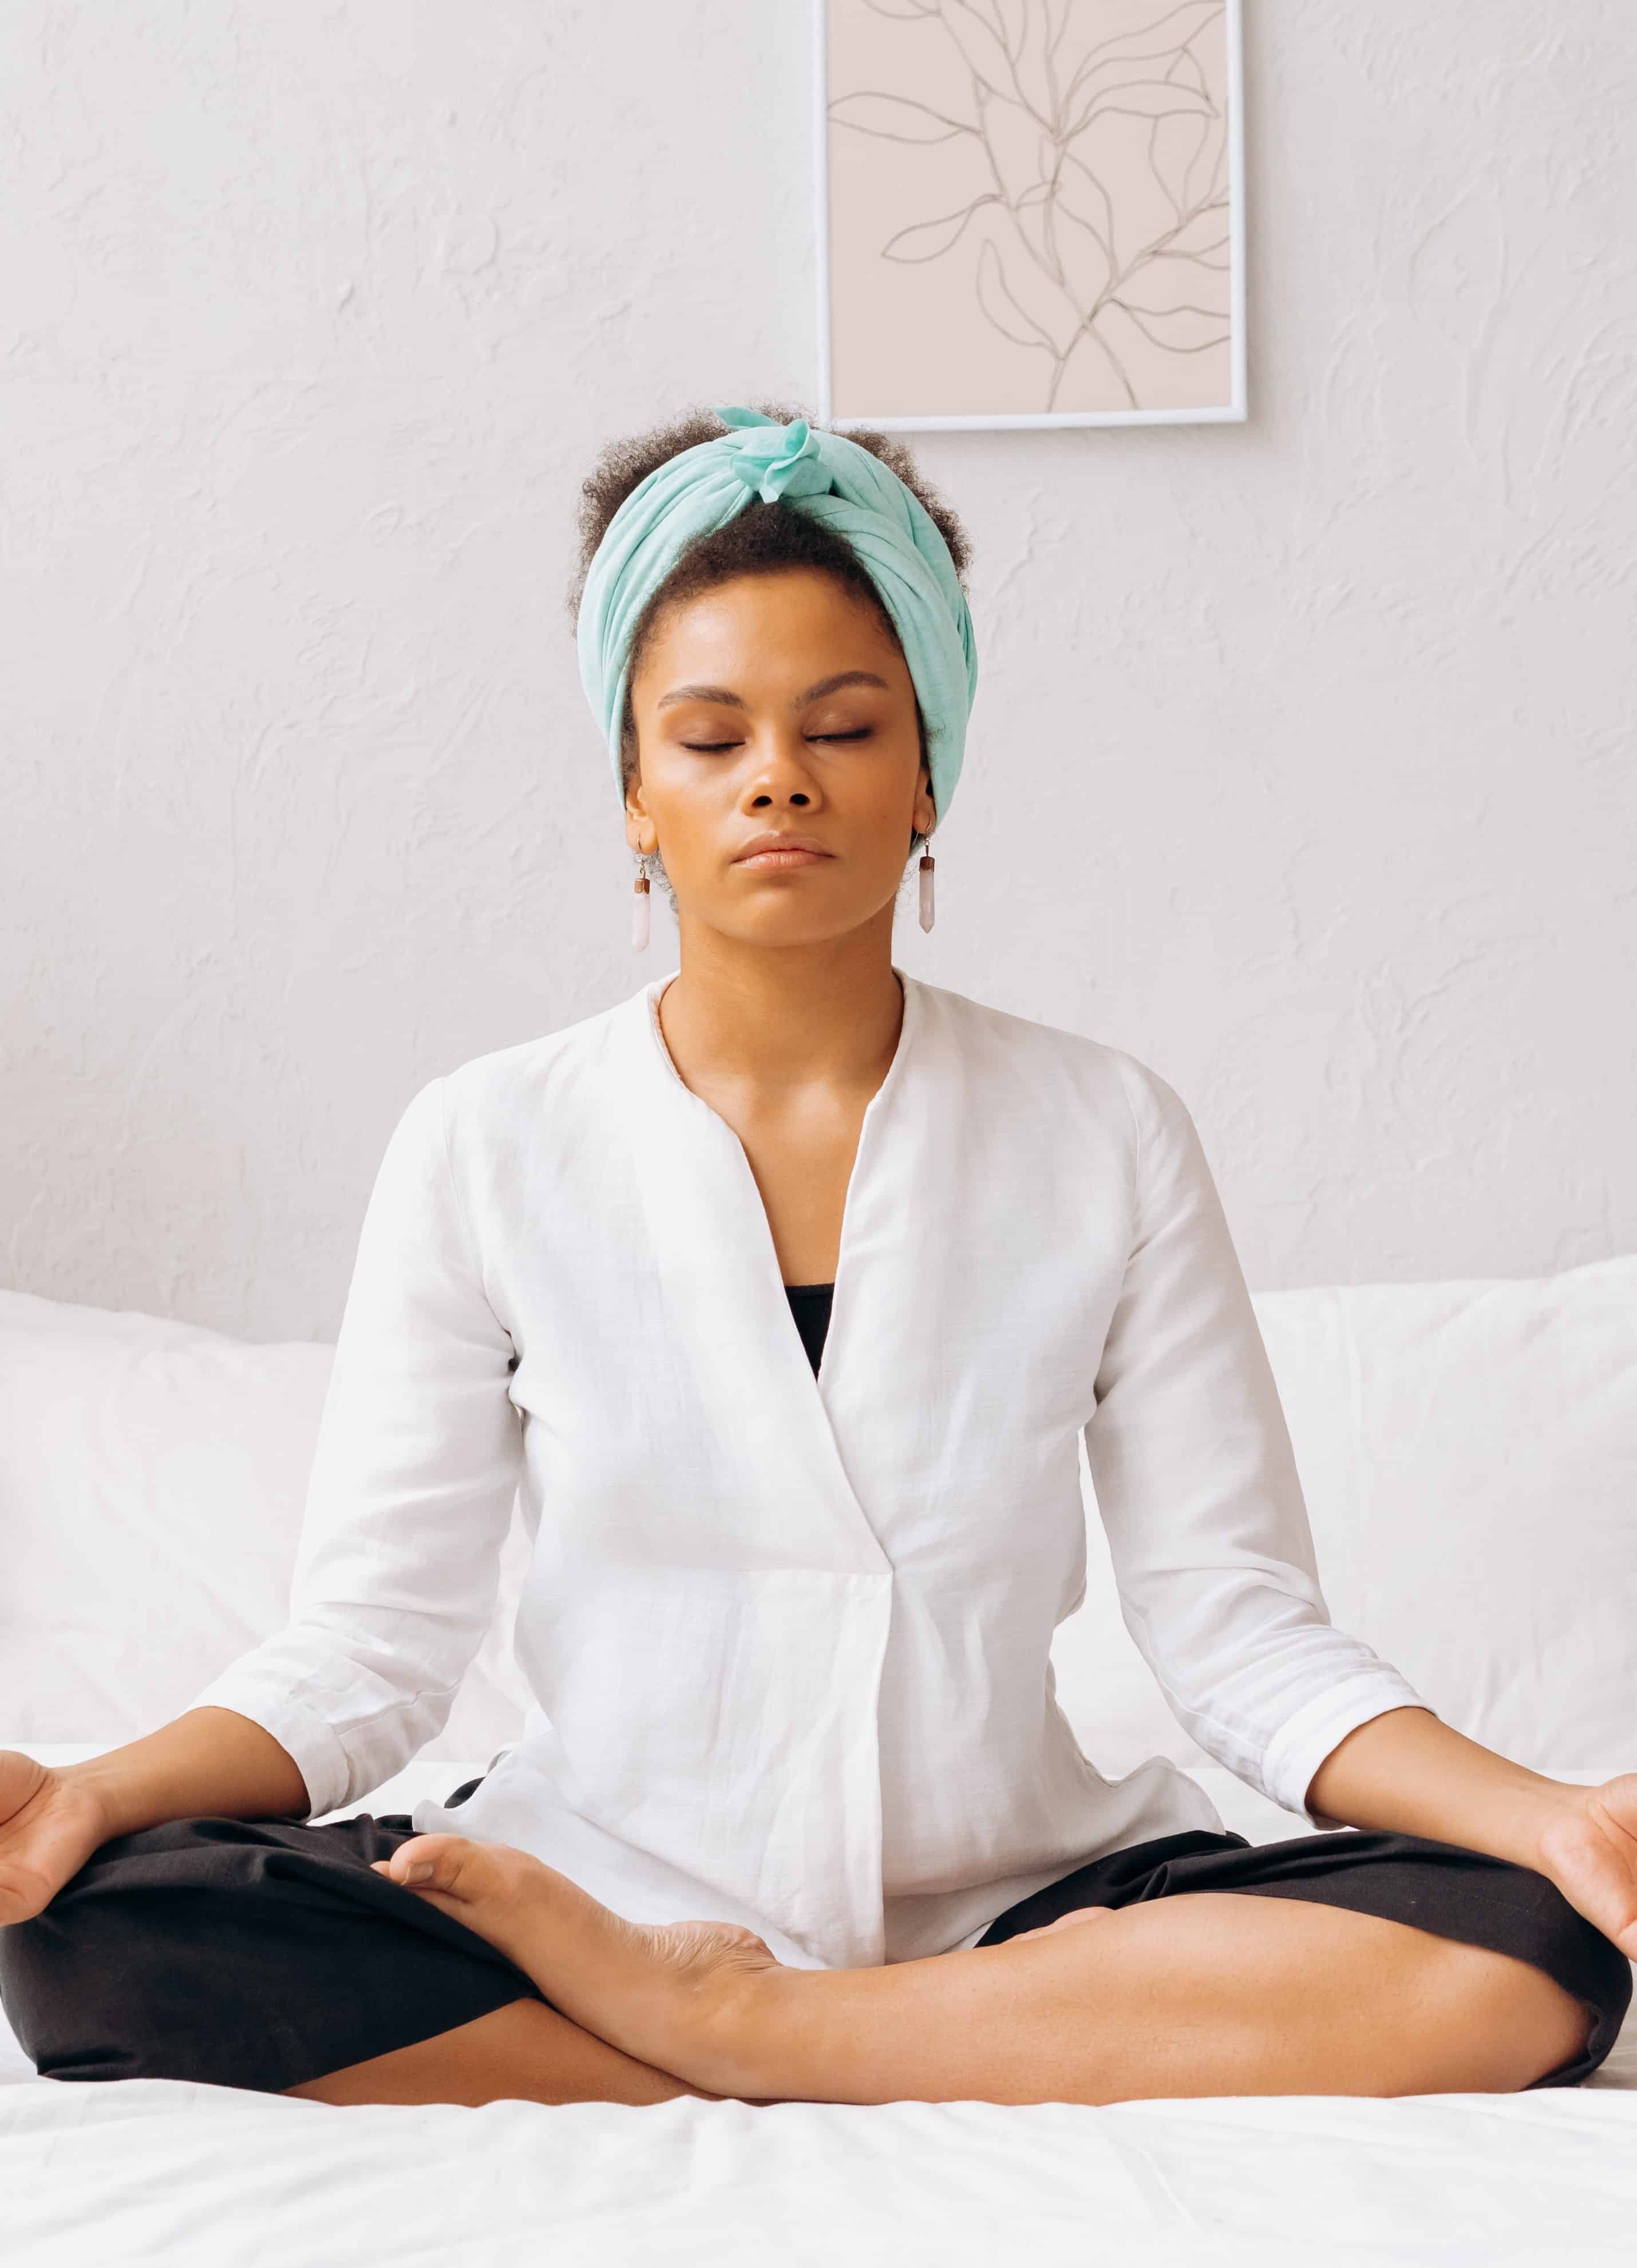 Stock photo of relaxed, black woman meditating with eyes closed.